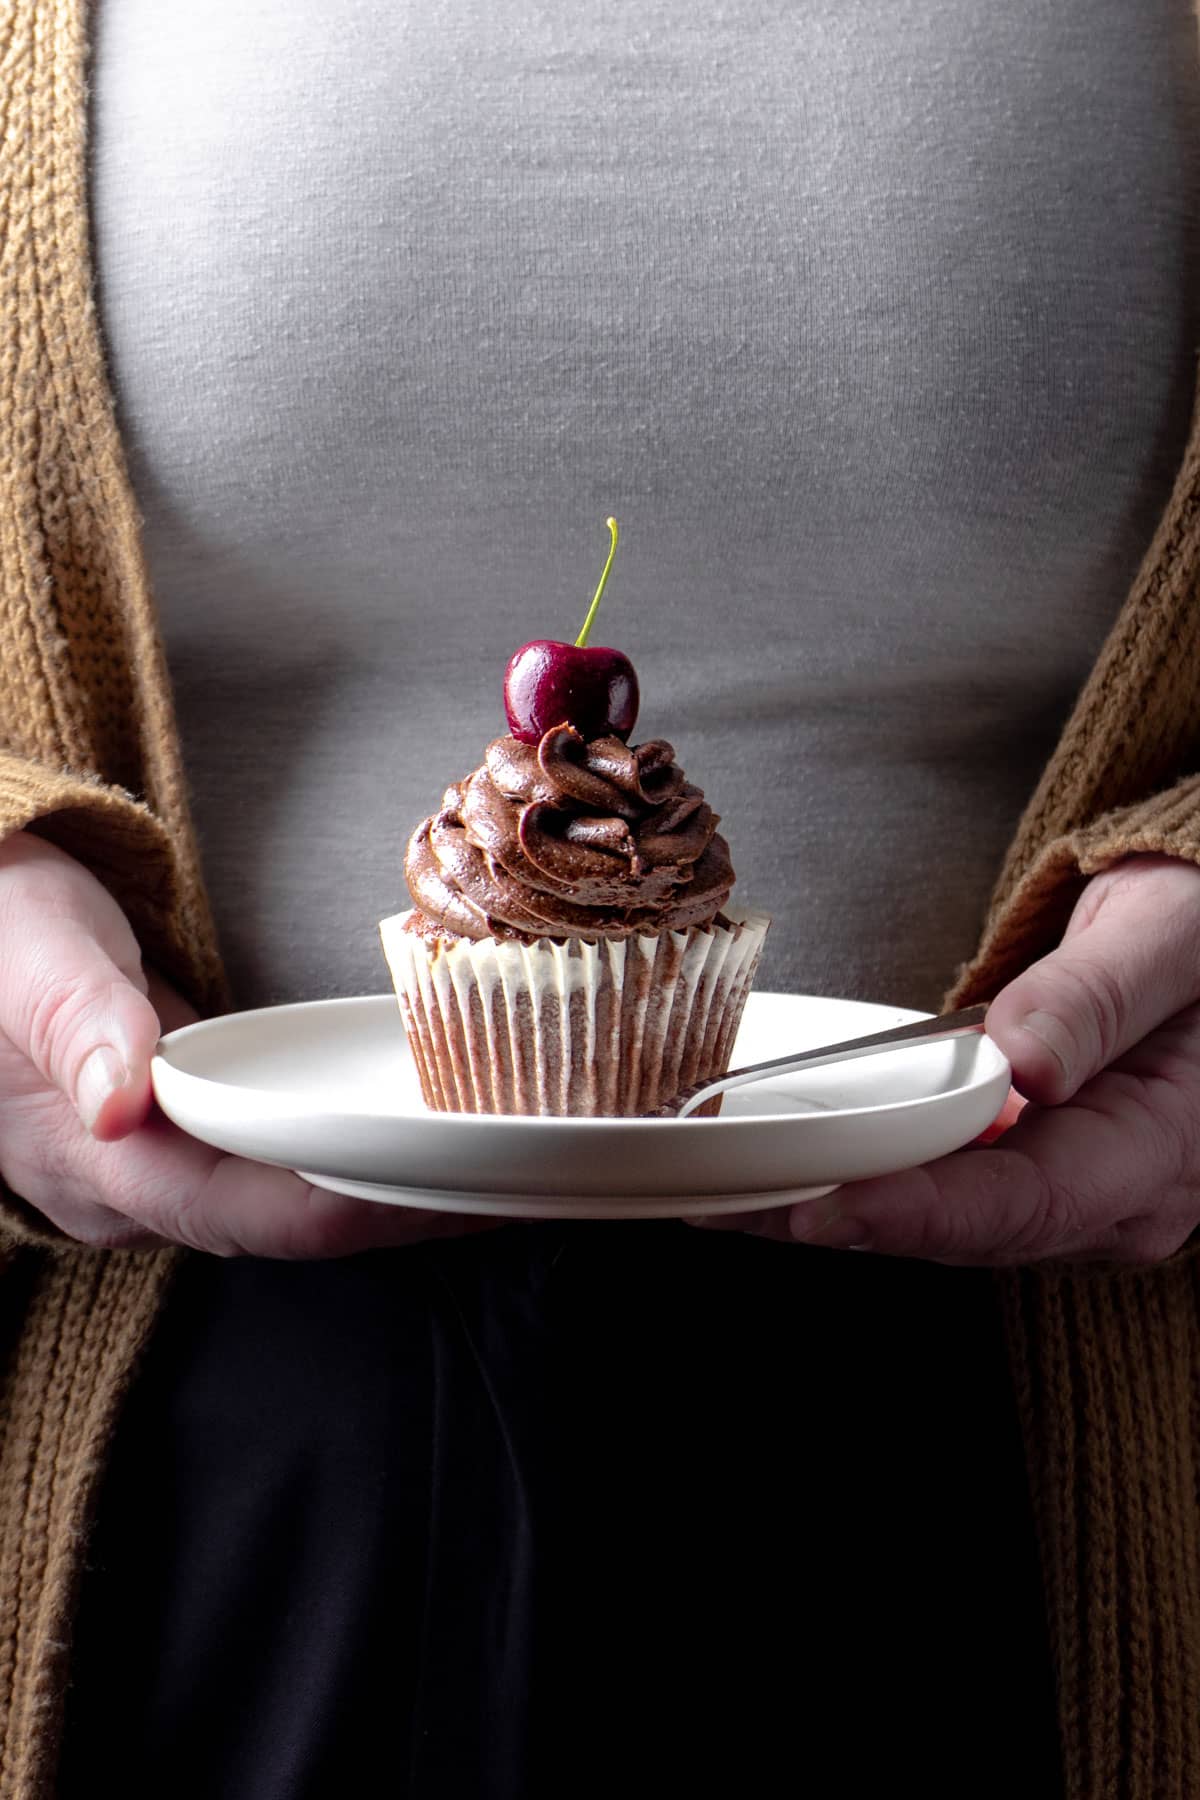 A chocolate cupcake with a cherry on the top being held on a plate - Photography and styling by Lou Carruthers, Food Photographer